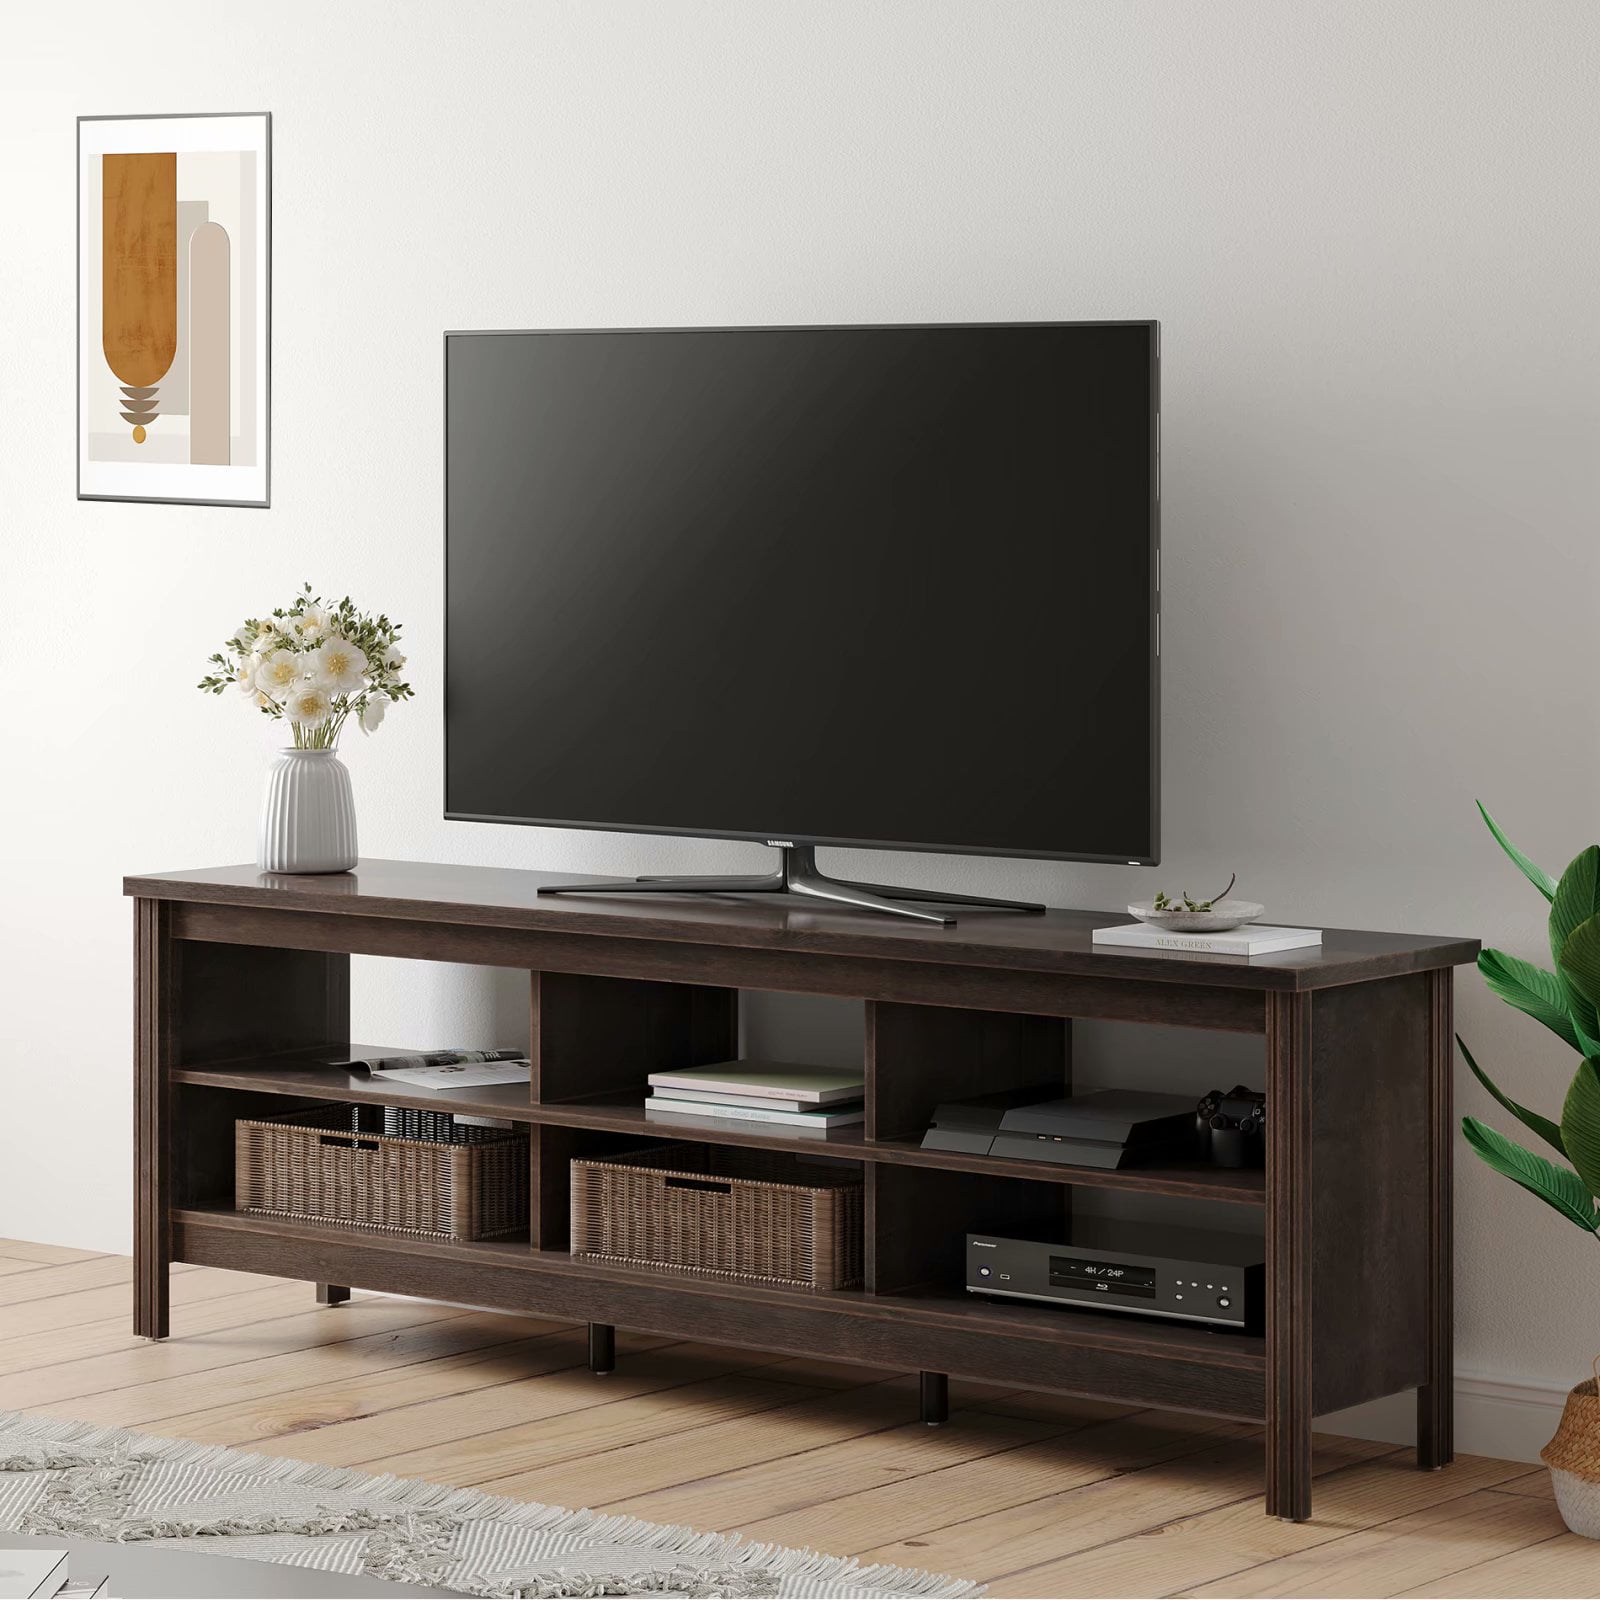 Manor Park Wood TV Media Storage Stand For TVs Up To 70in espresso 